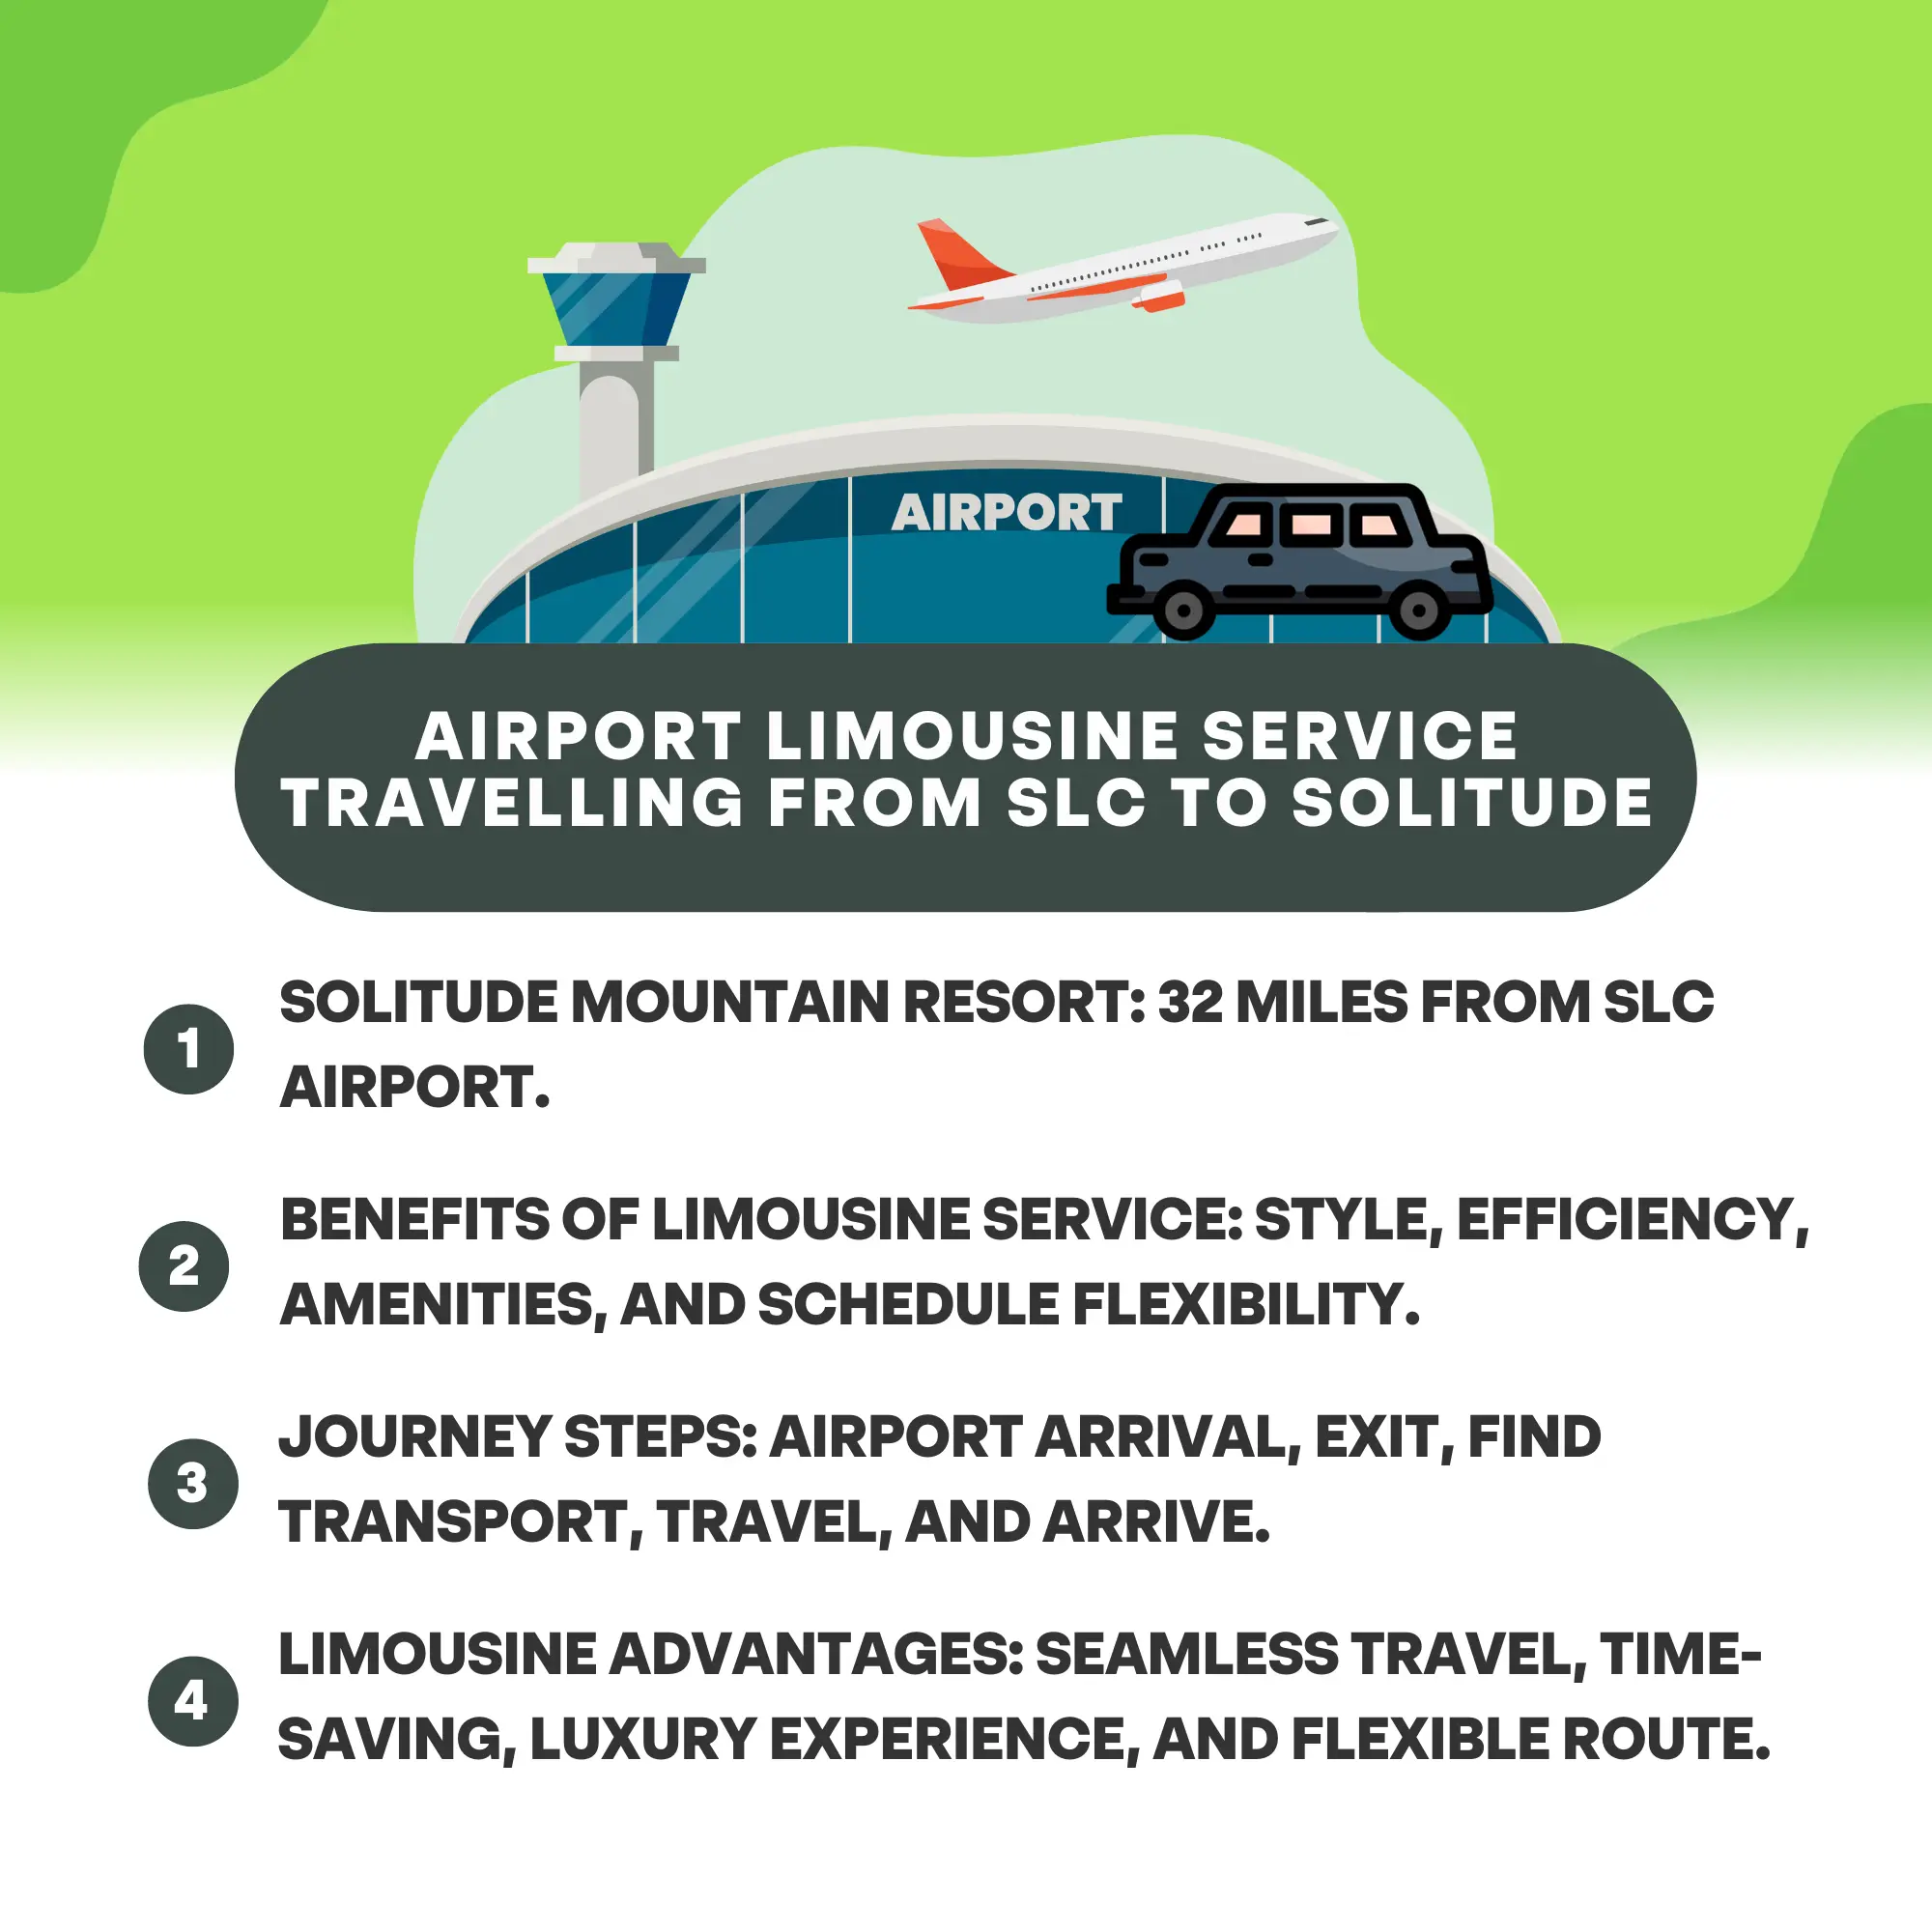 Airport Limousine Service: Travelling From SLC to Solitude 